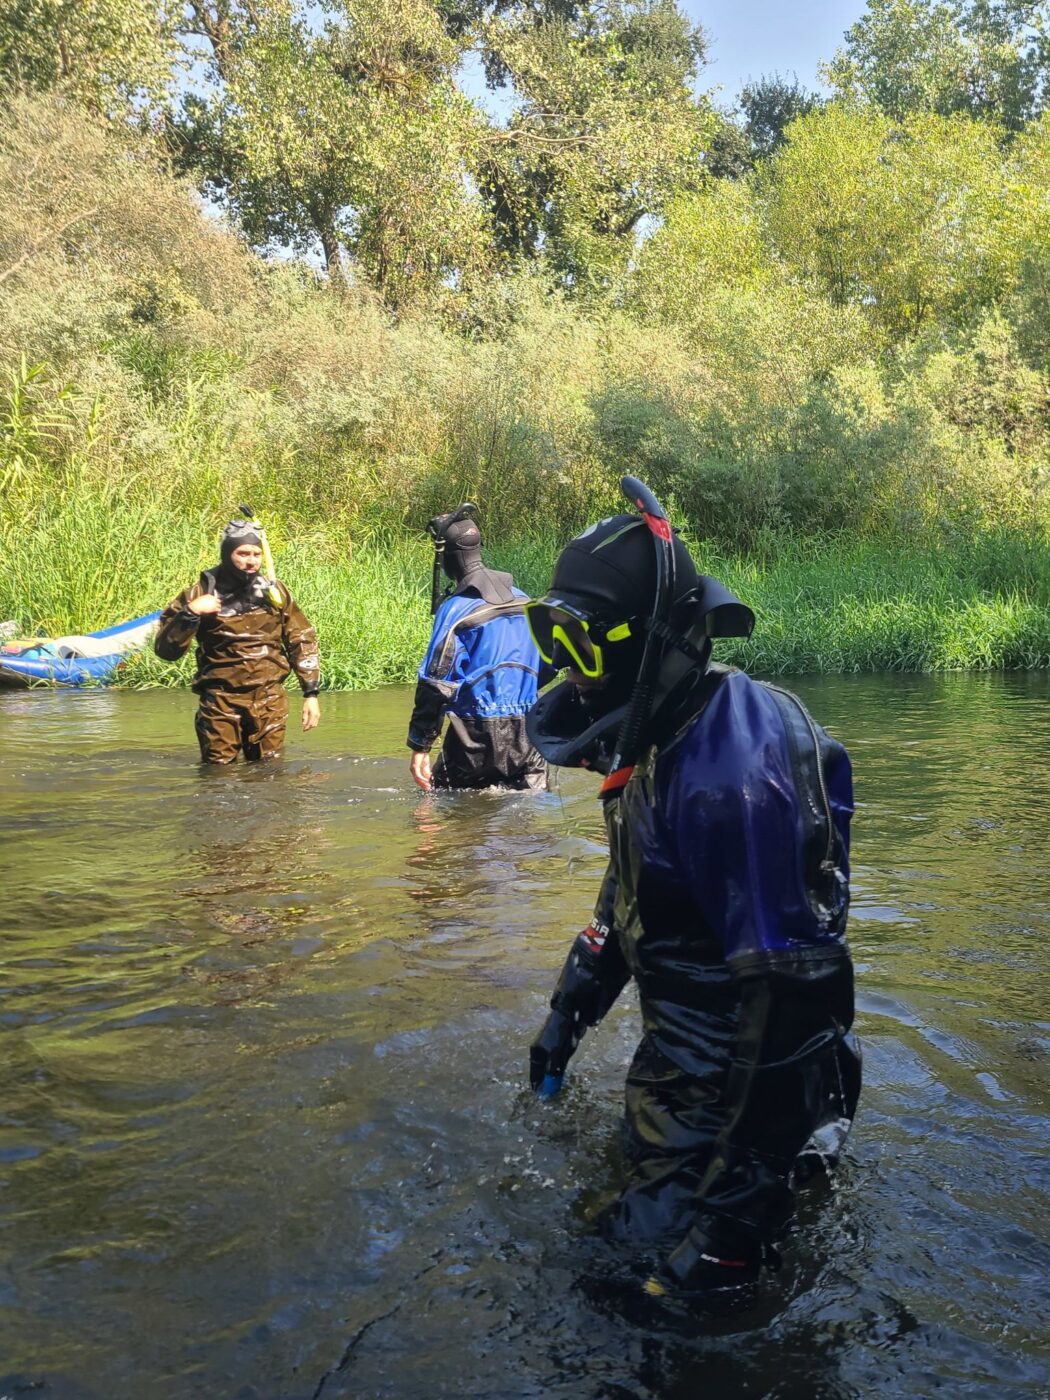 Three people in dry suits with snorkels on are standing in waist deep water surrounded by trees.